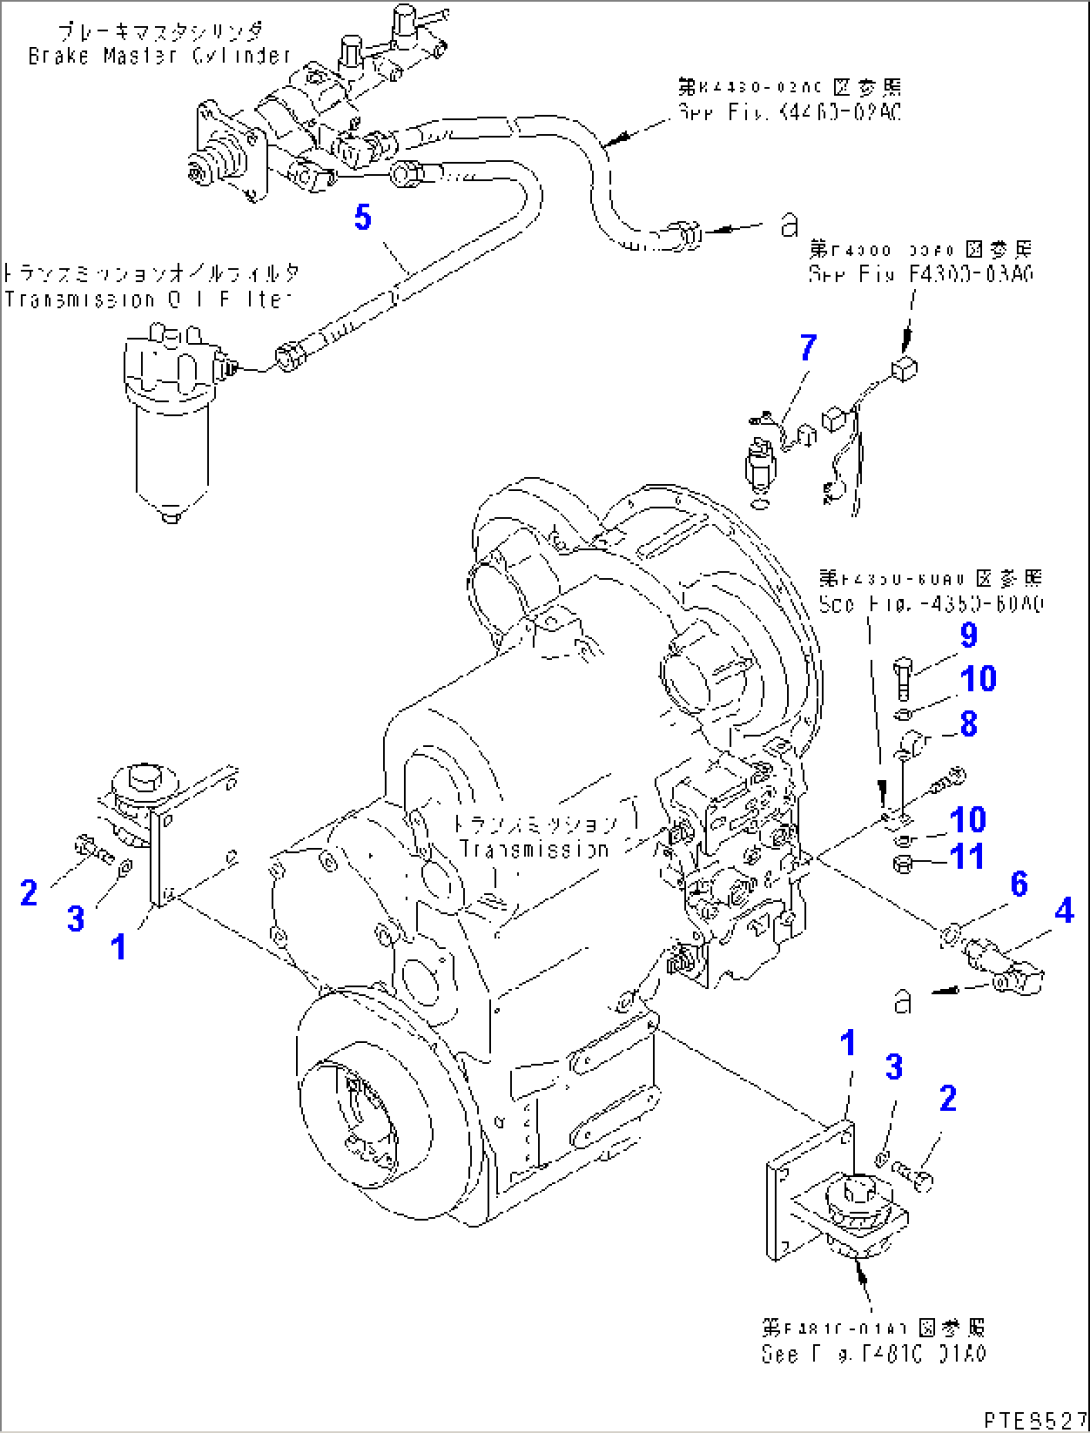 TRANSMISSION (ATTACHMENT) (FOR 3-SPEED)